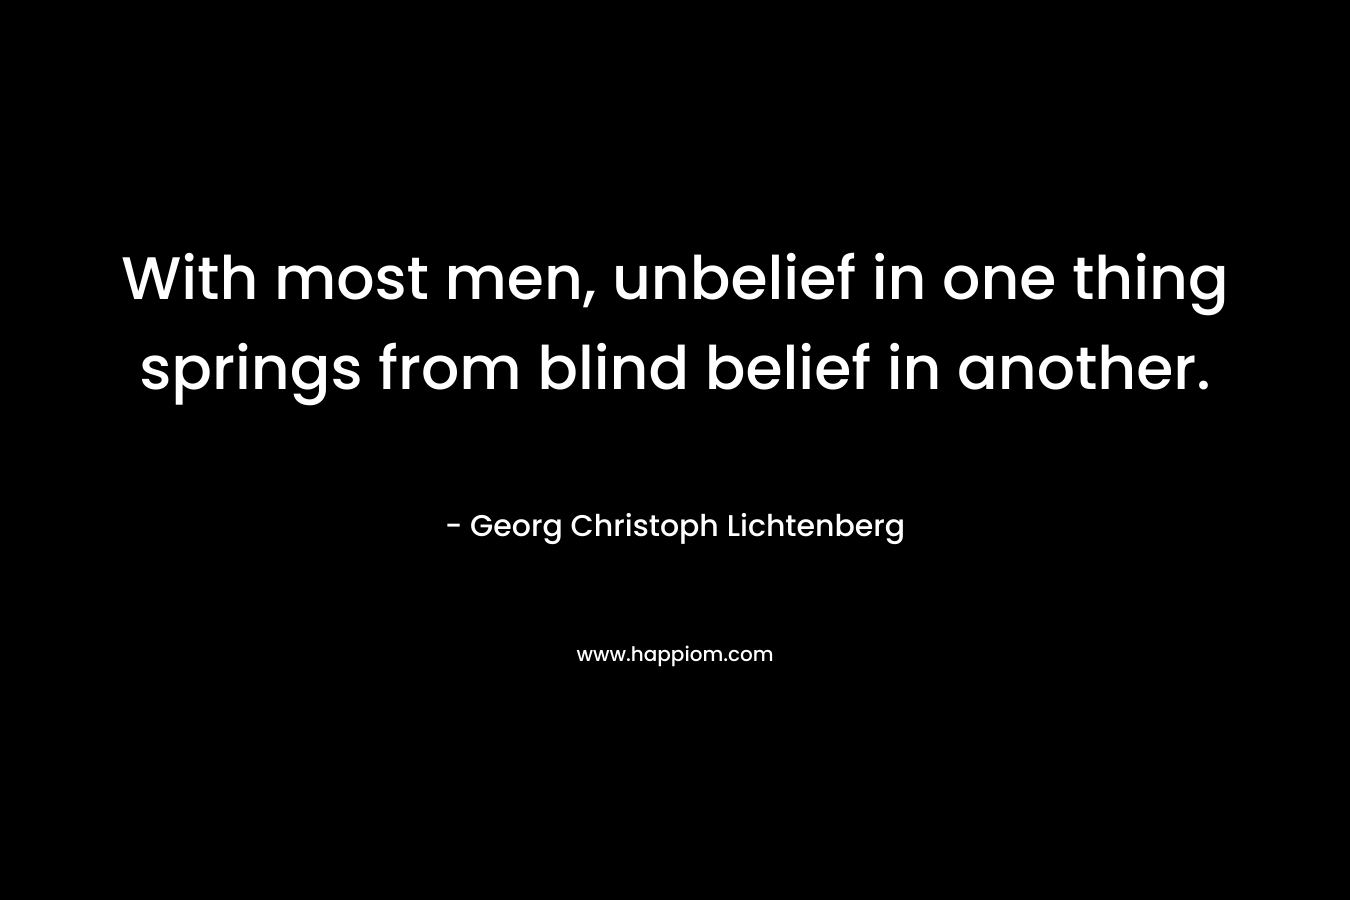 With most men, unbelief in one thing springs from blind belief in another.